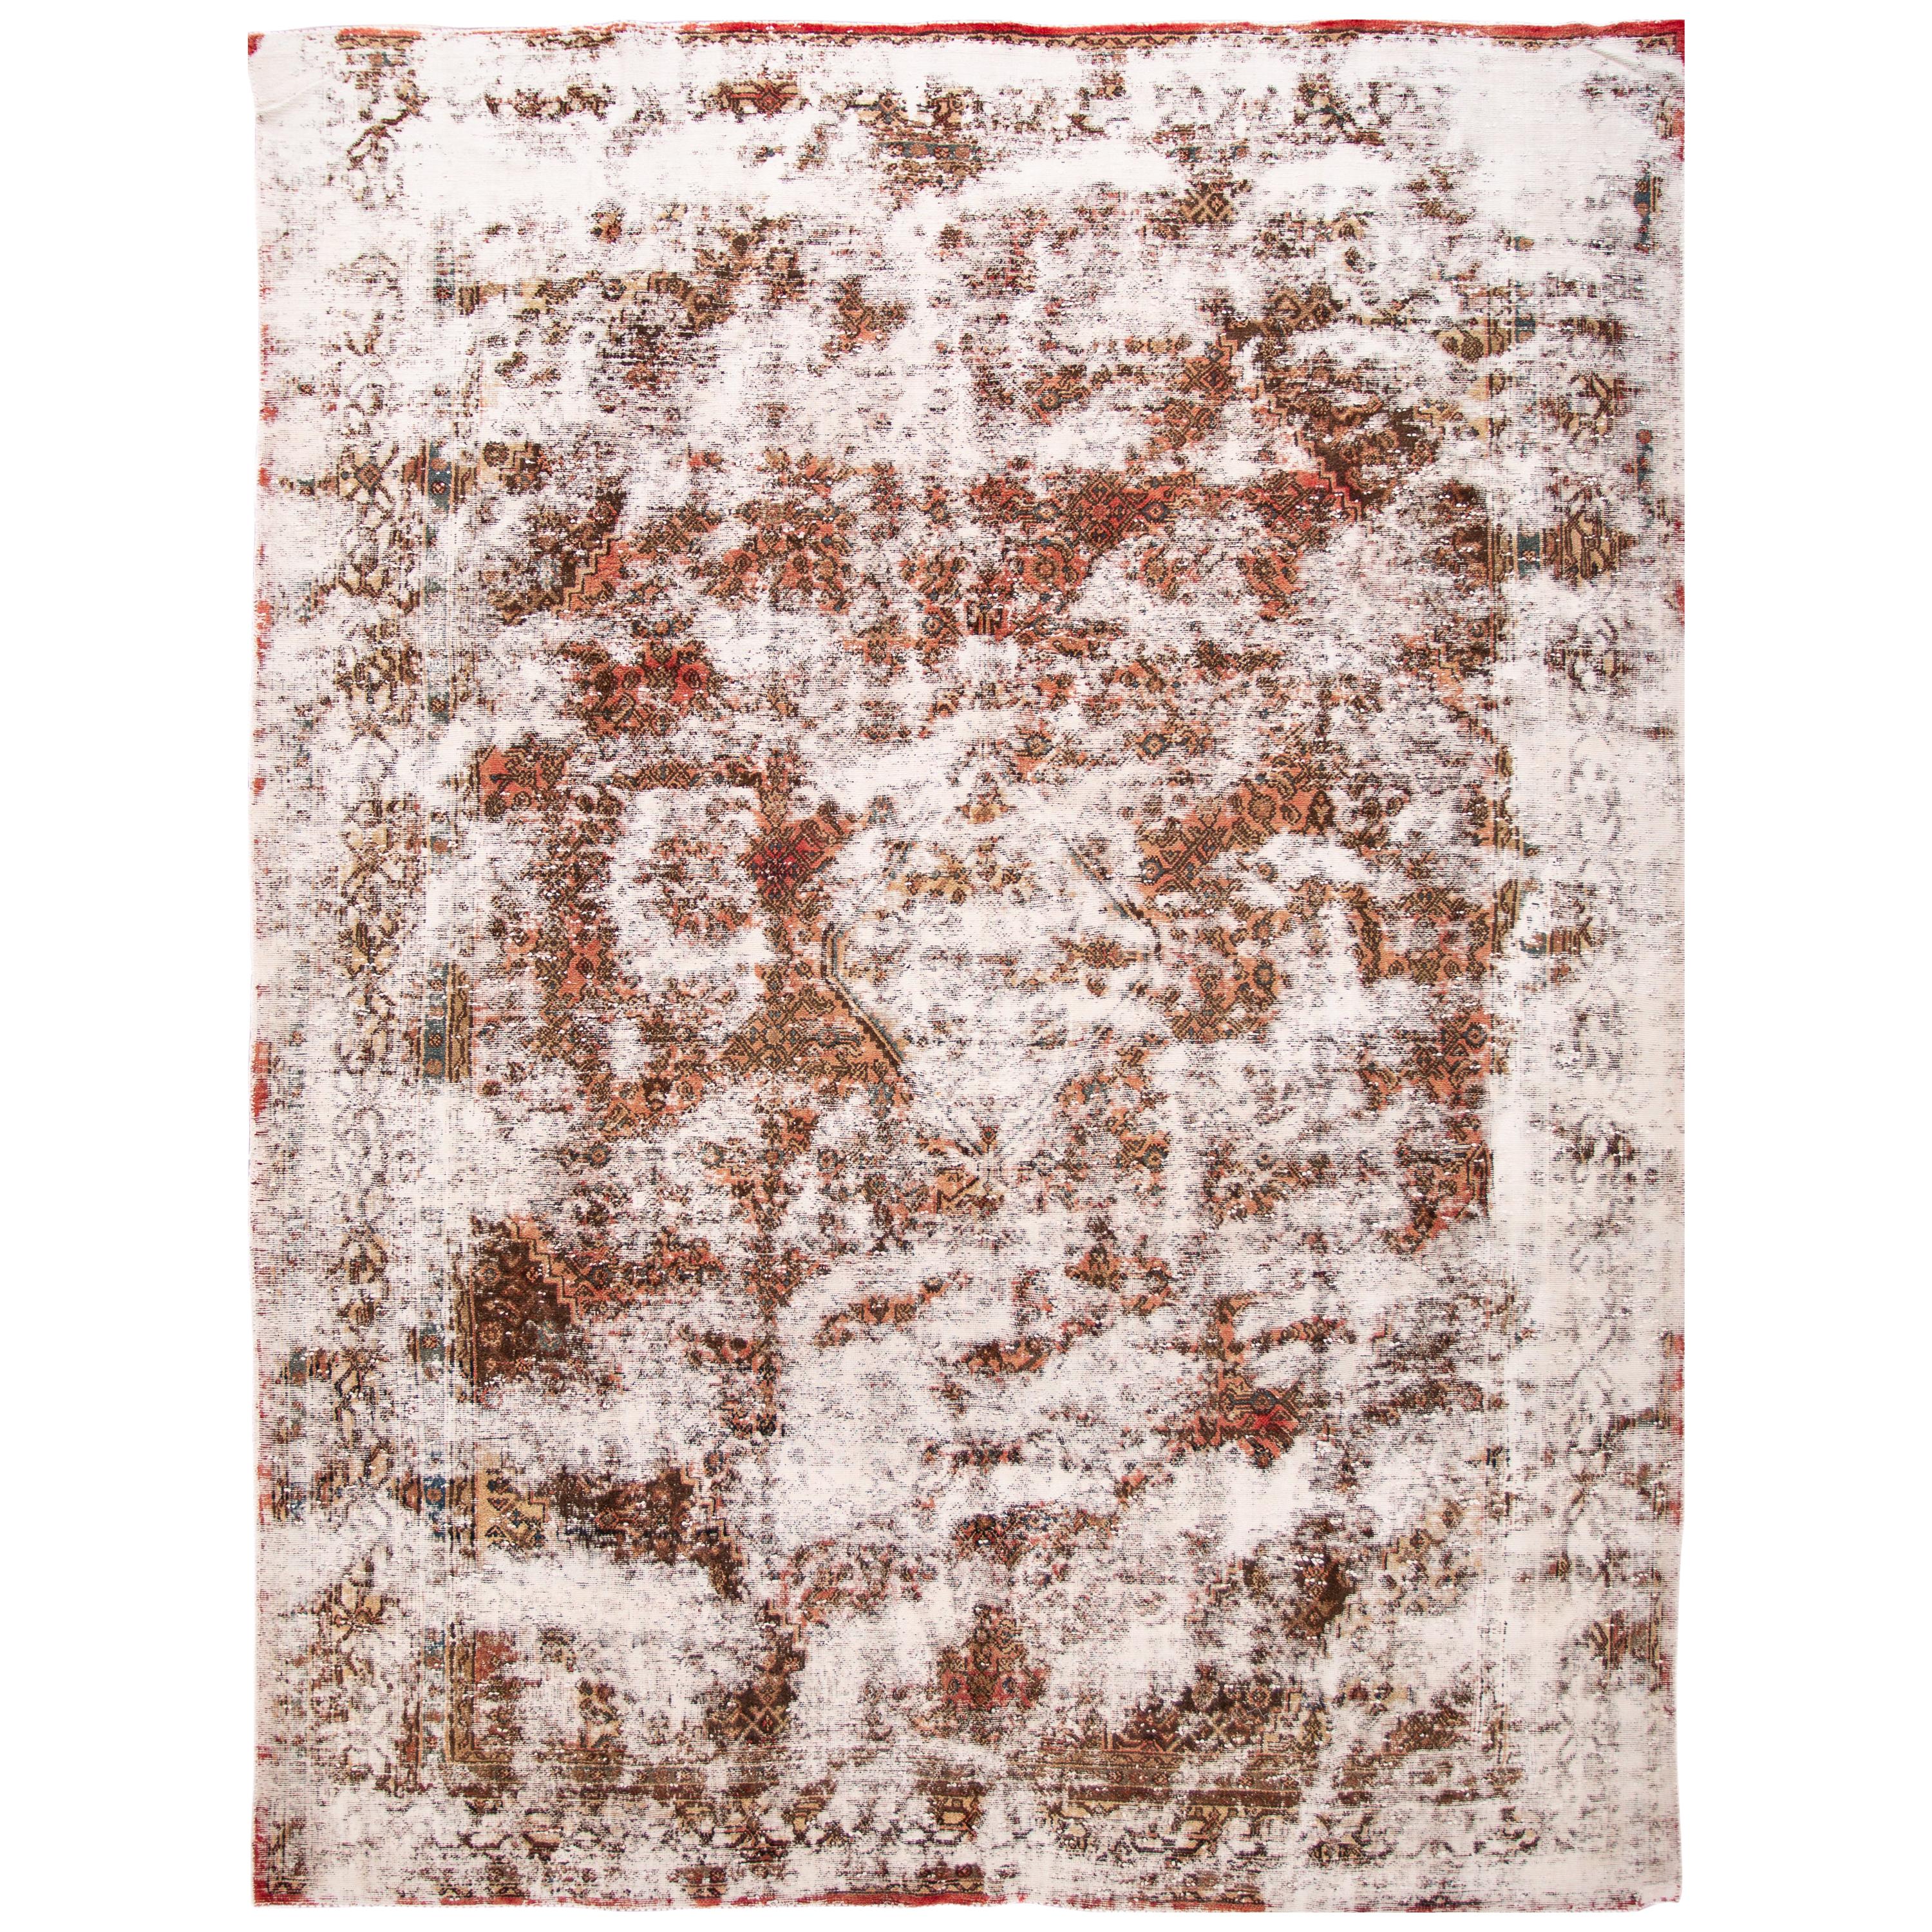 Early 20th Century Antique Distressed Wool Rug